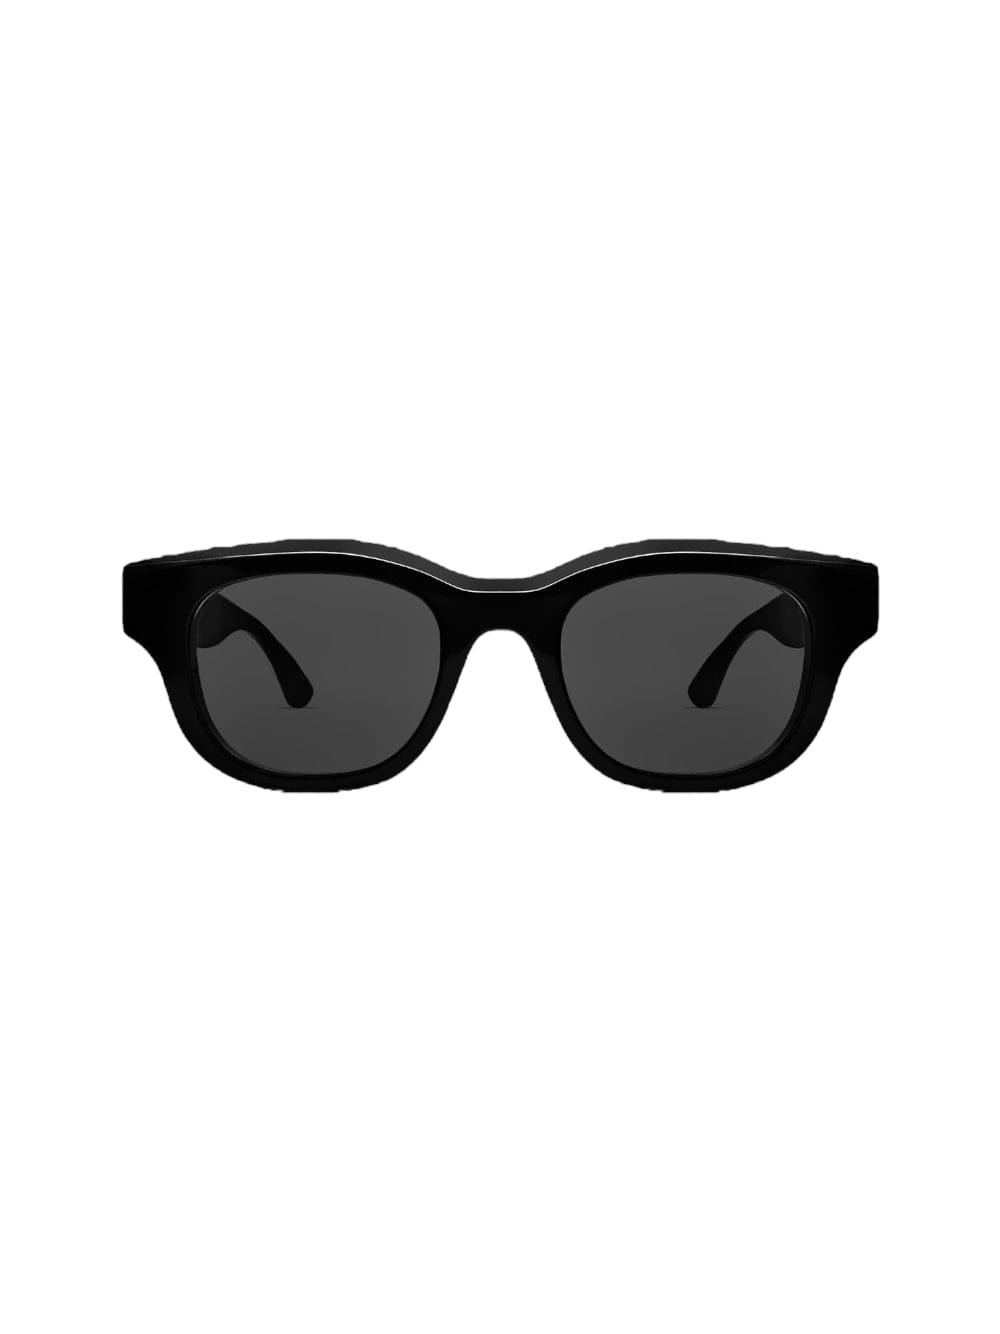 Thierry Lasry Deadly - Black Sunglasses